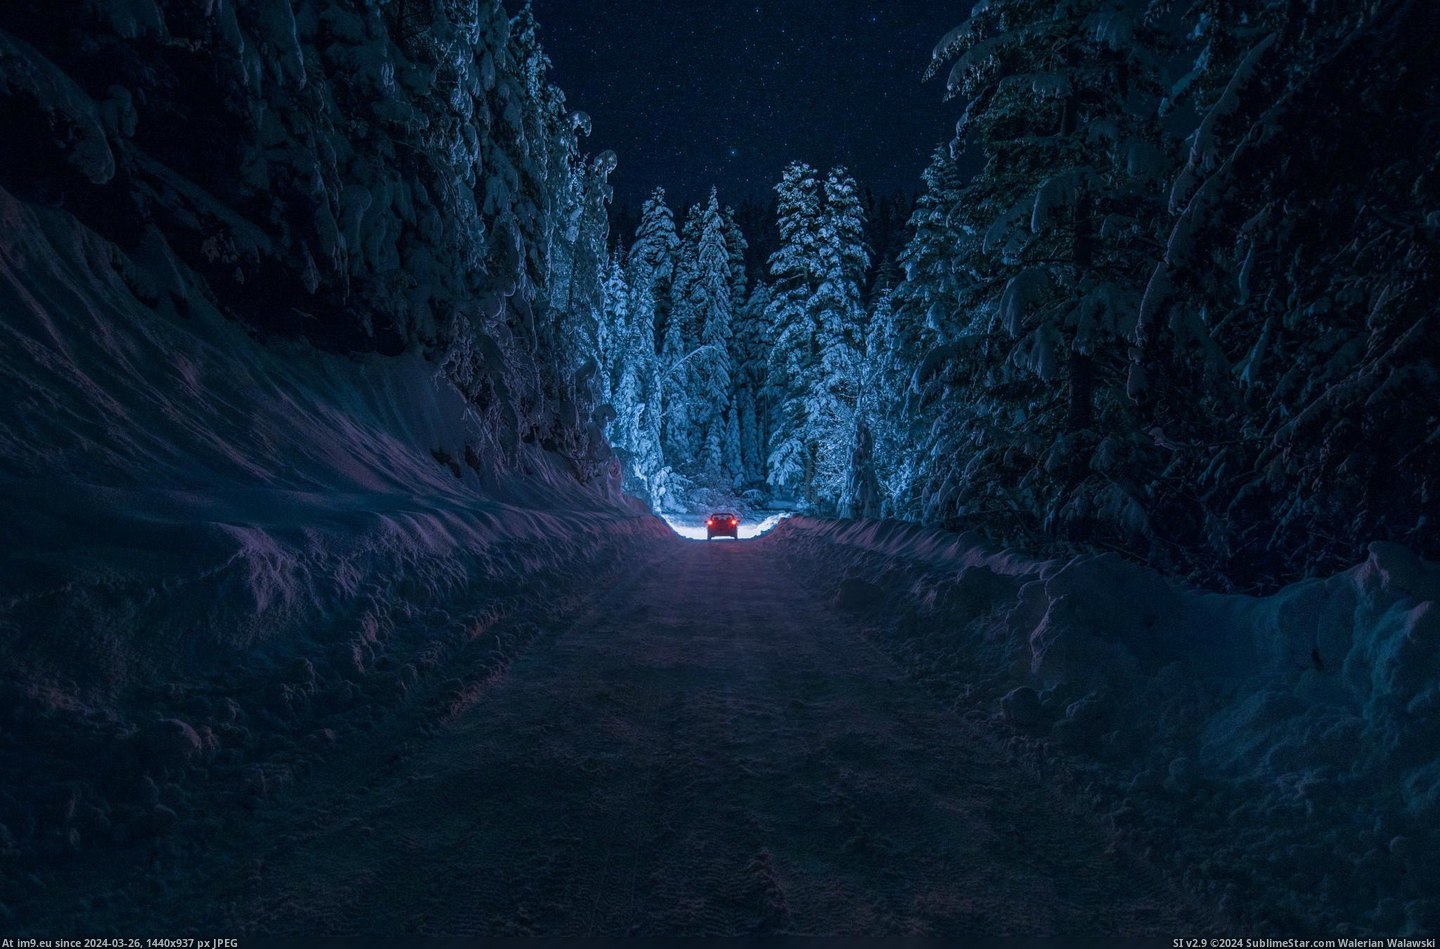 #Forest #Snowy #Peaceful #Driving [Pics] Driving through a very peaceful snowy forest. Pic. (Изображение из альбом My r/PICS favs))